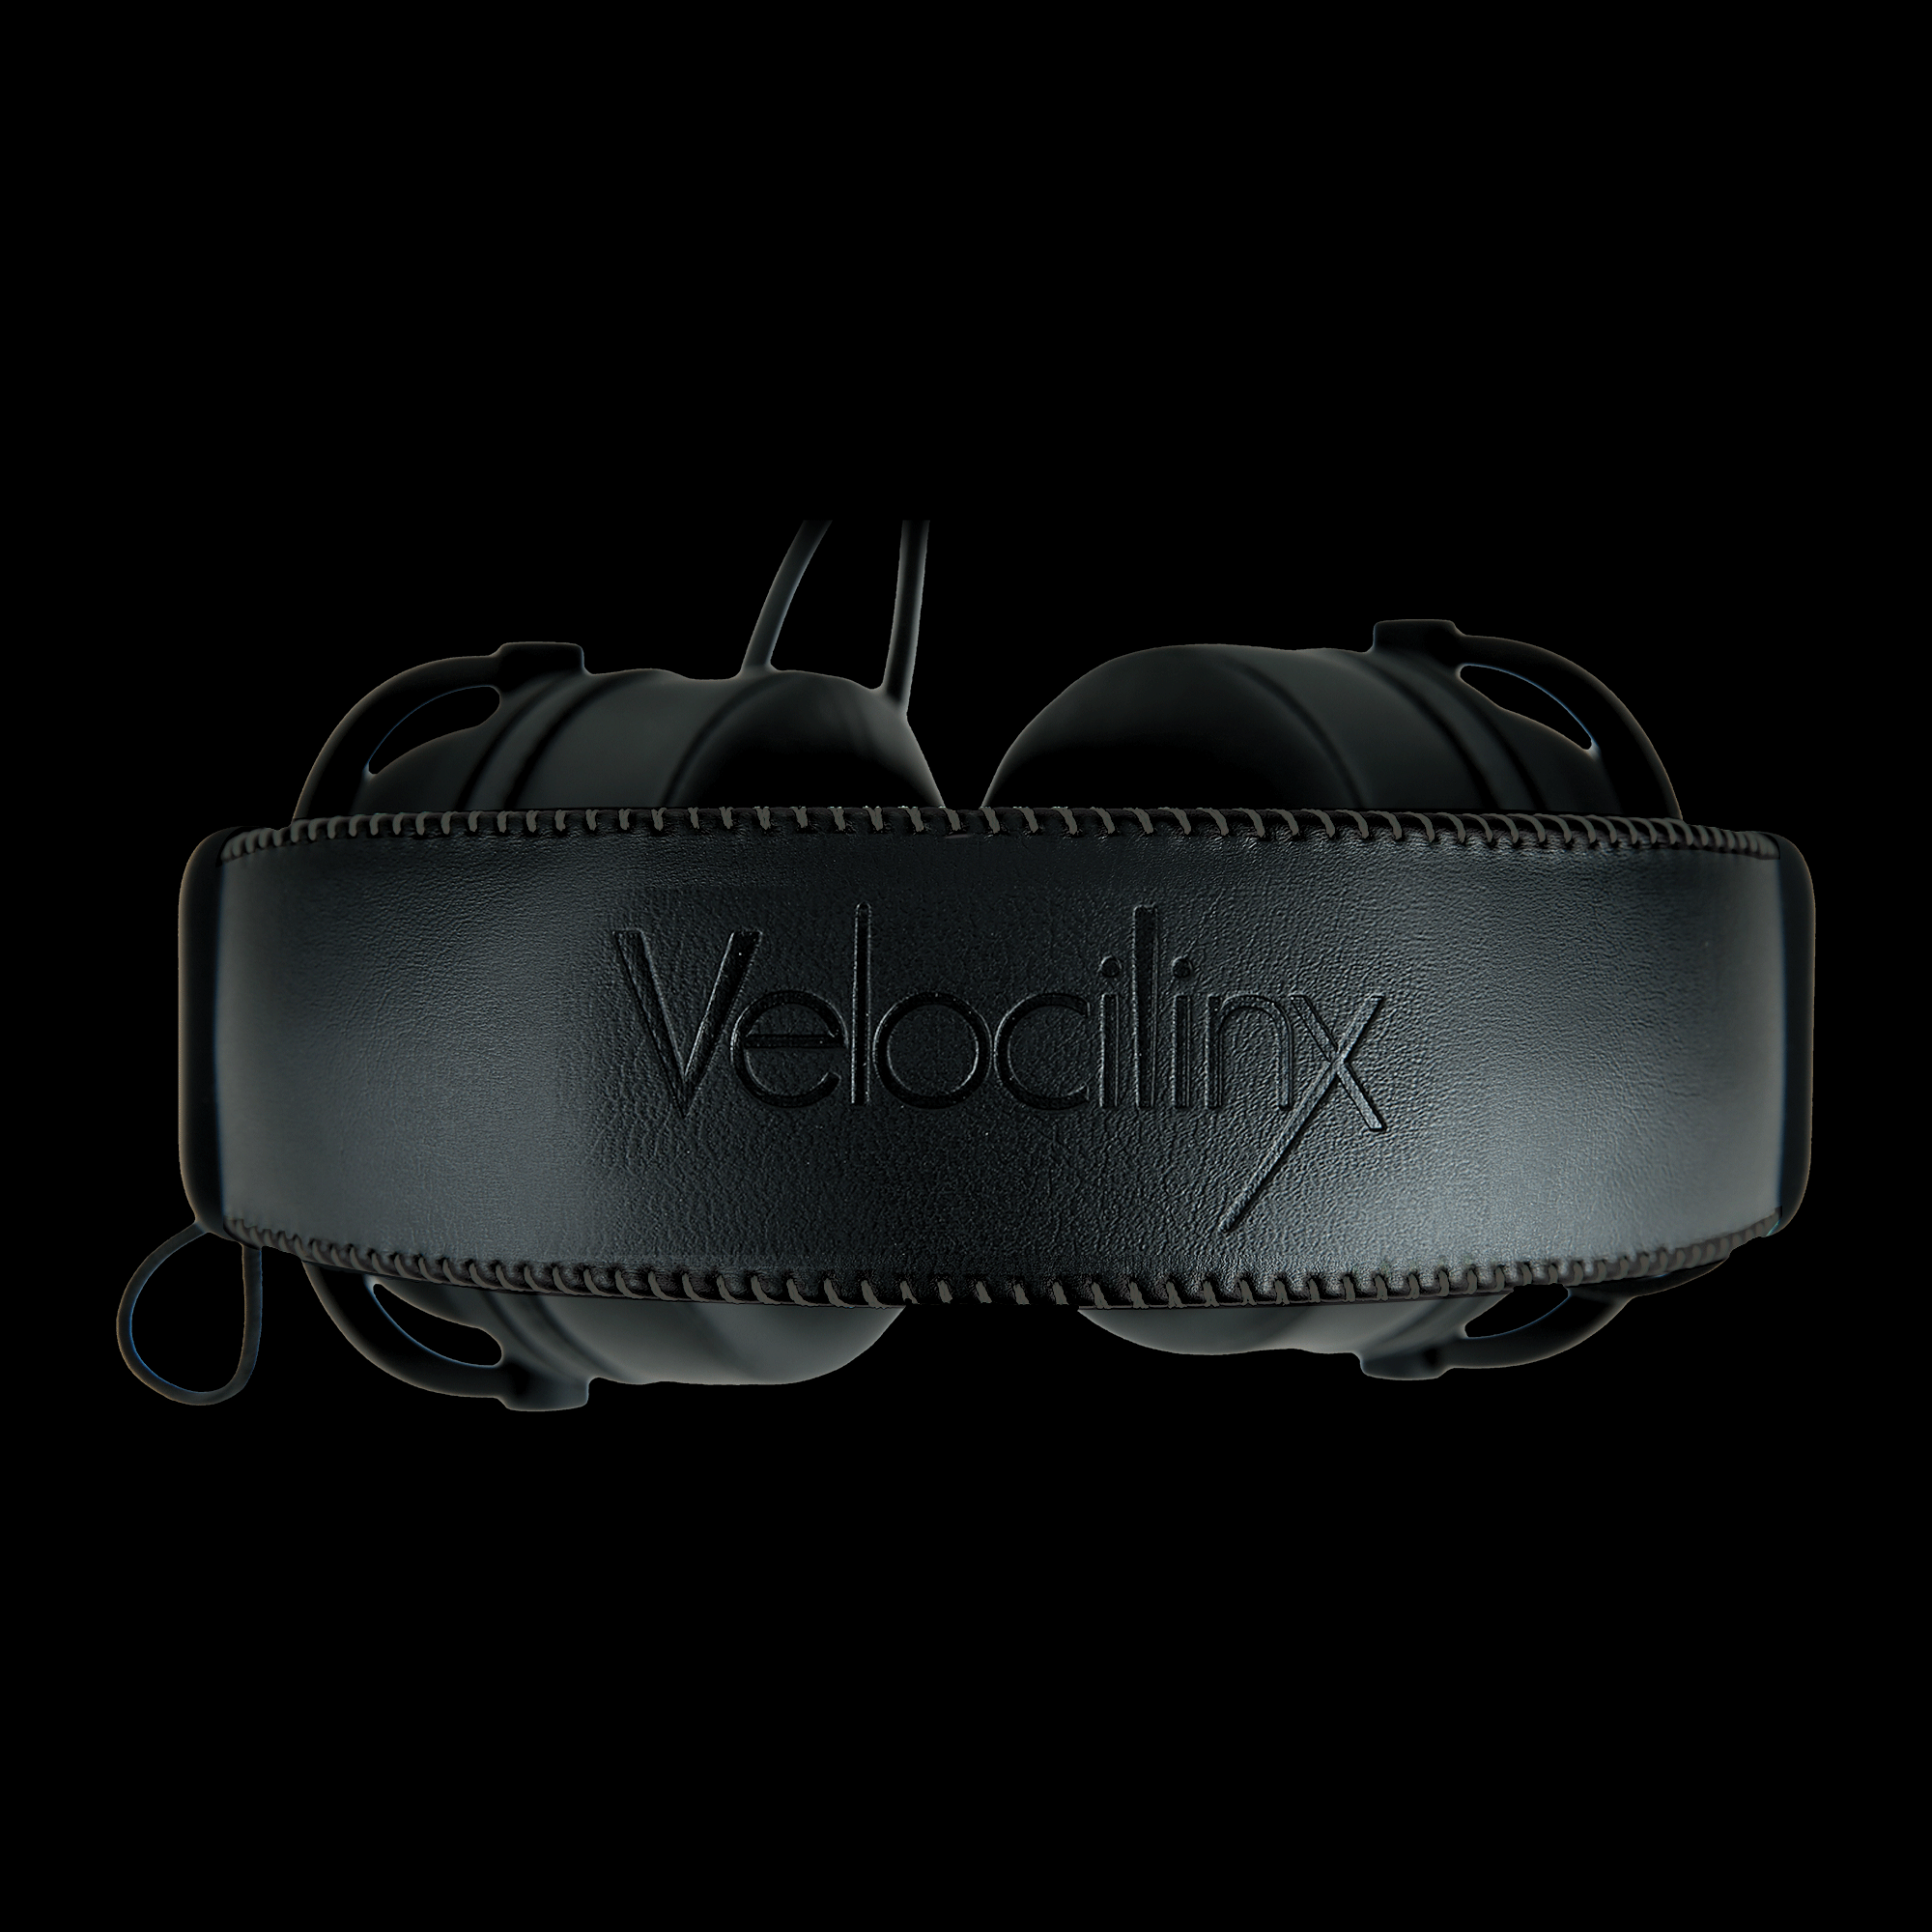 Areios headset top band with Velocilinx imprint